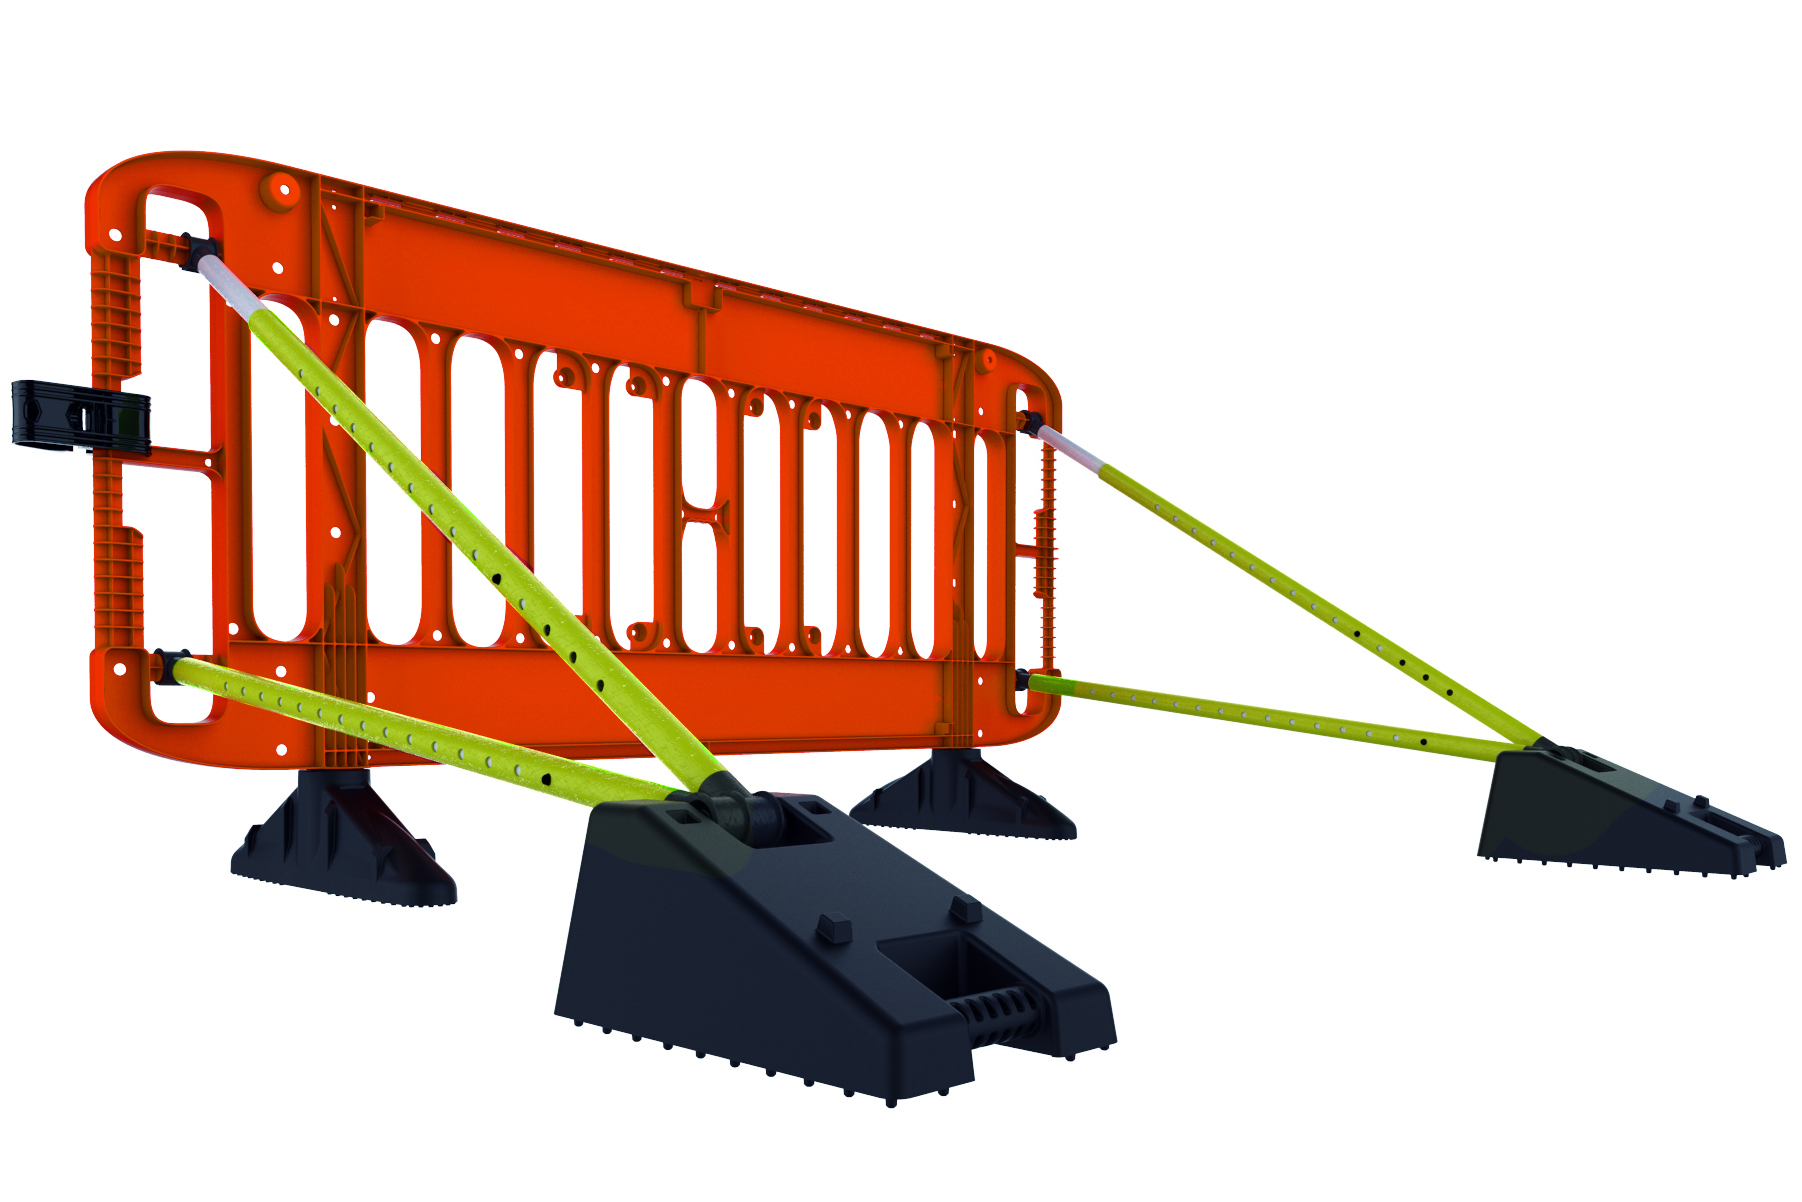 Example setup of the Titan barrier using Sure Blocks and SurePole